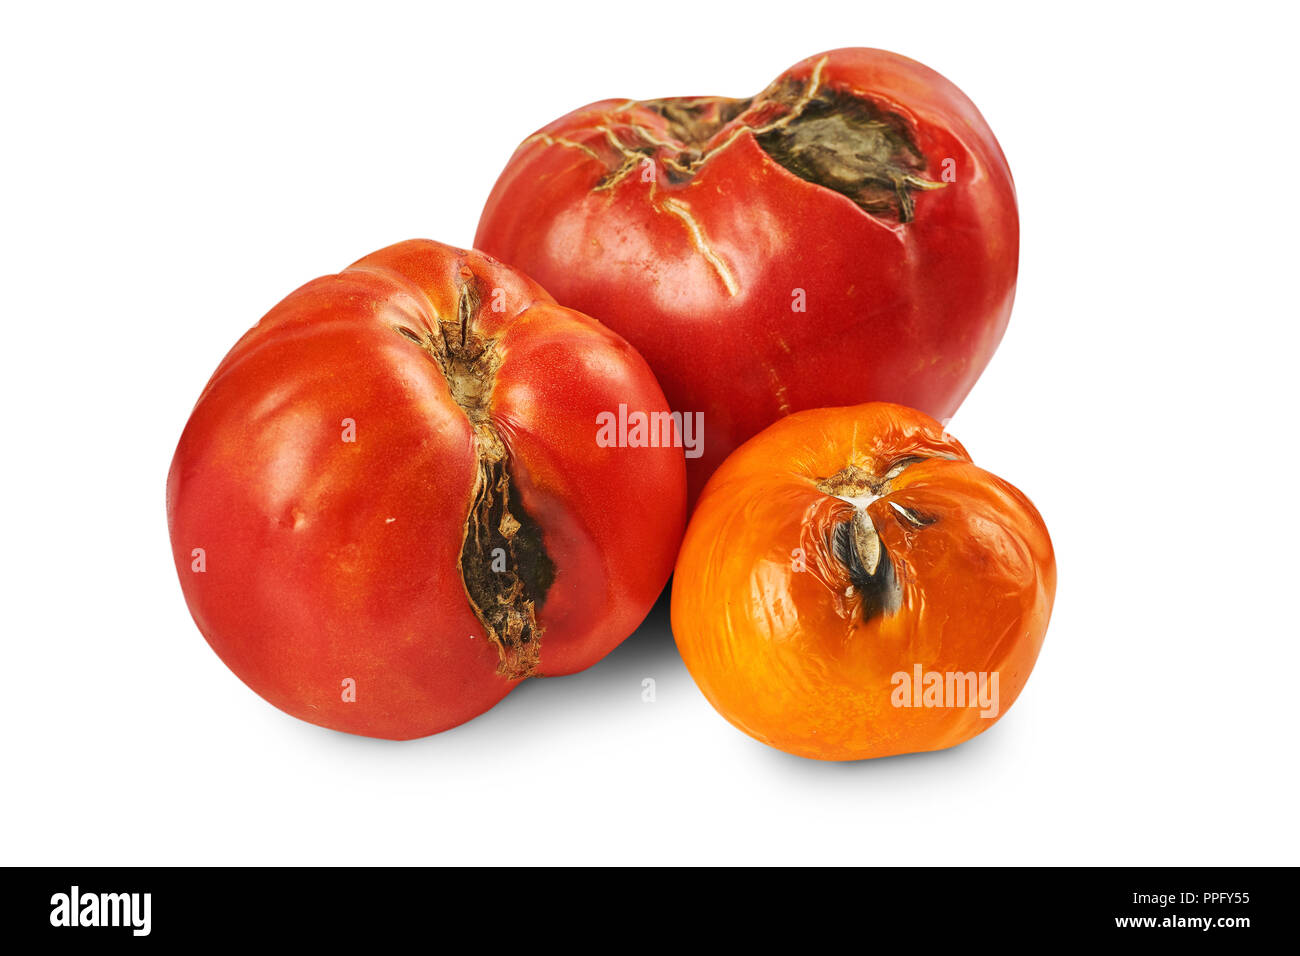 Spoiled, rotten three tomatoes isolated on white background. Stock Photo